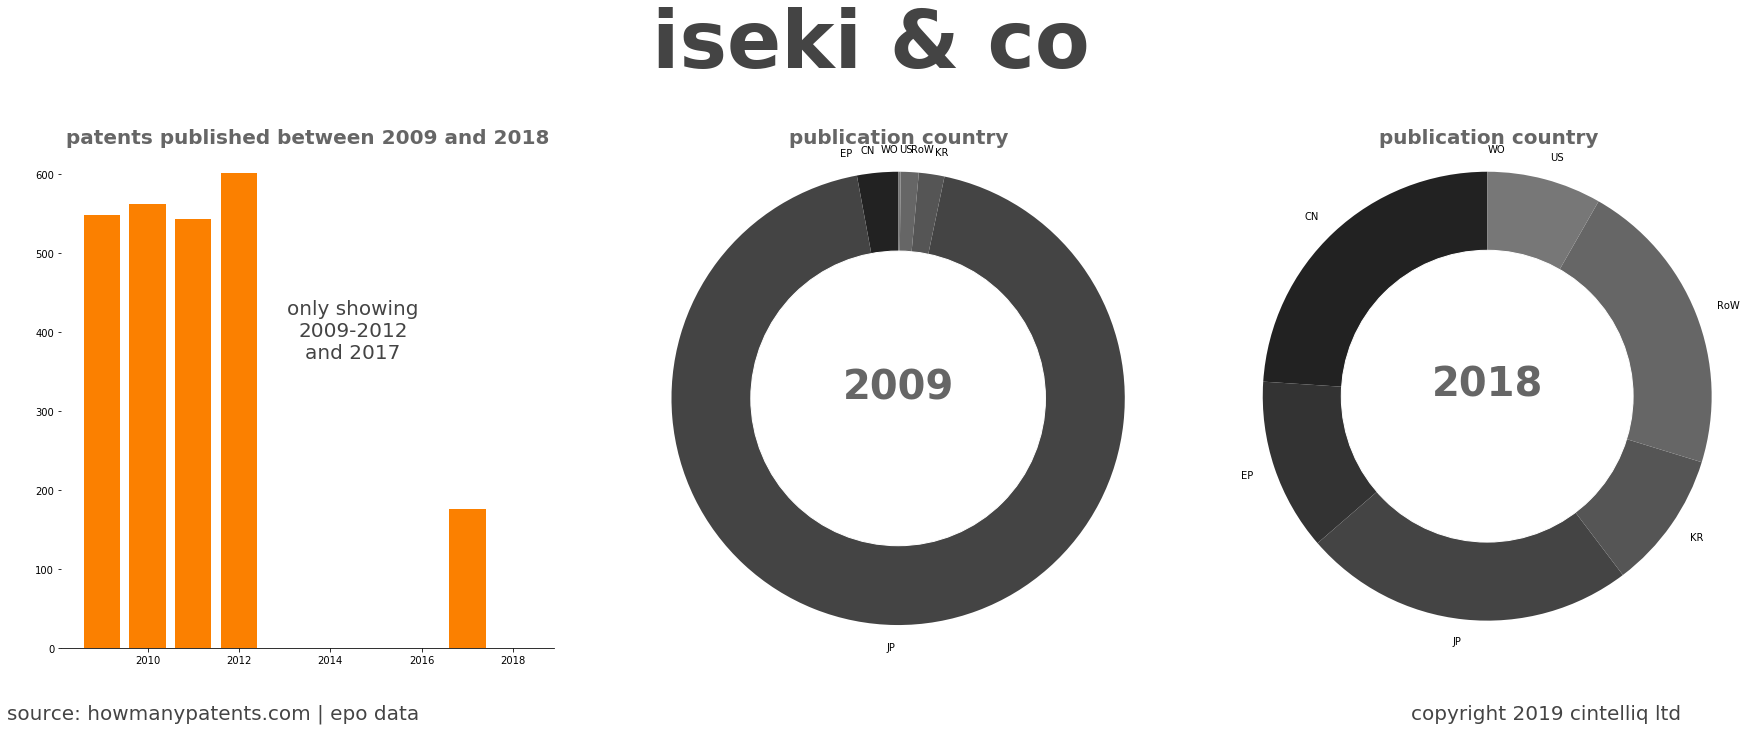 summary of patents for Iseki & Co